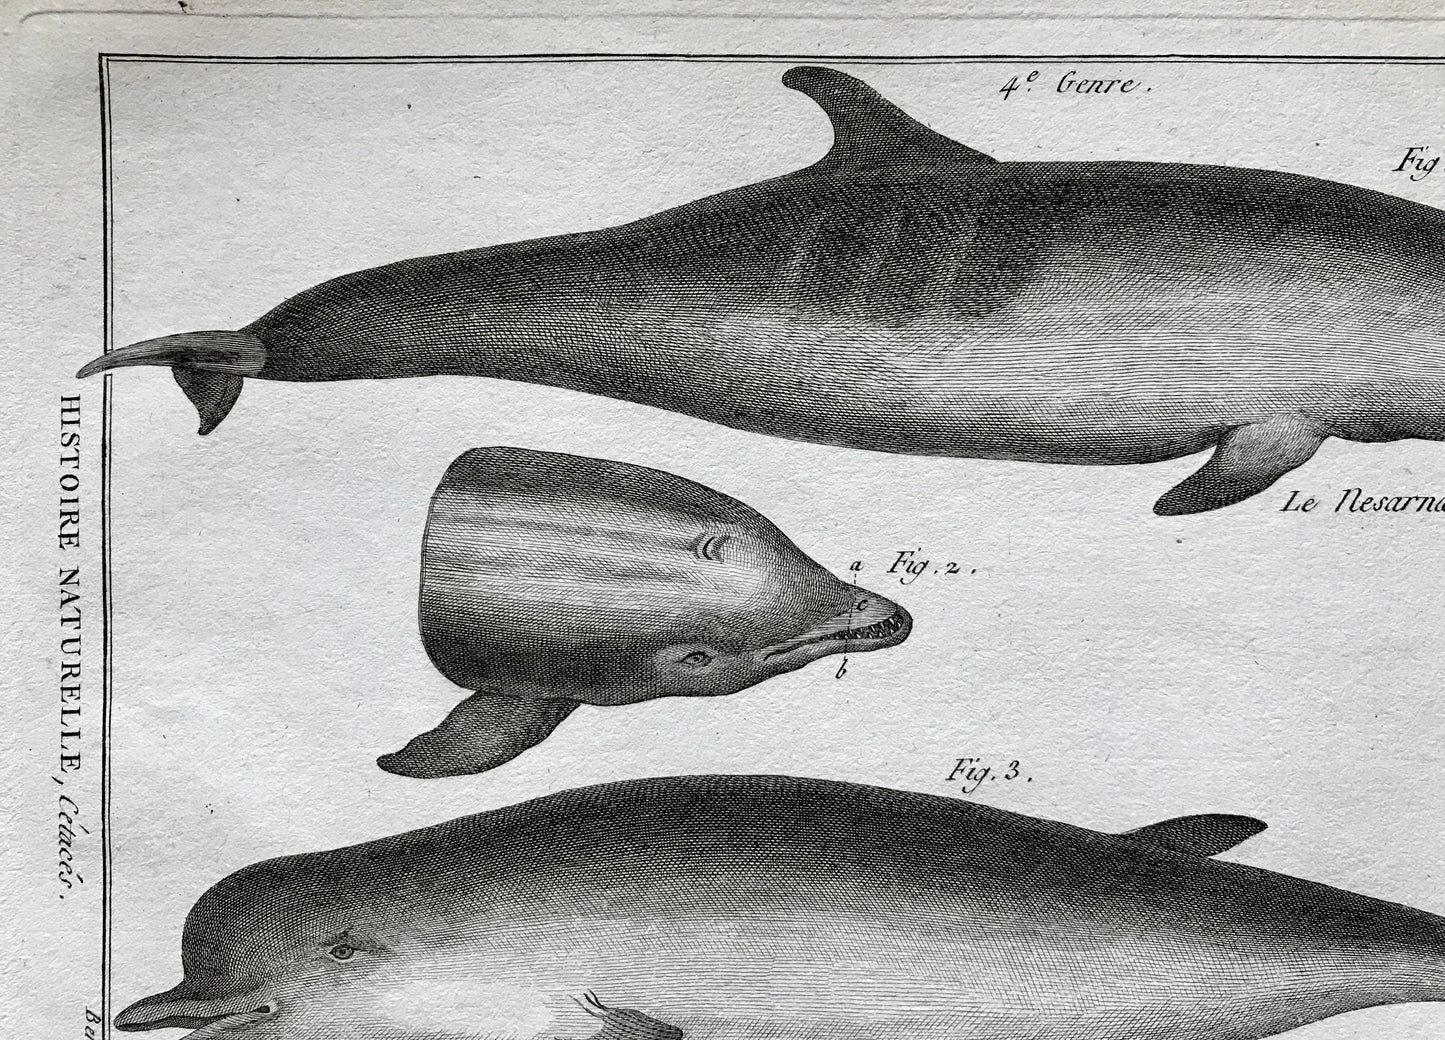 An Antique Engraving of Dolphins. Black and White. Engraved by Bernard Direxit. French c. 1827. Very Good Condition. 31.5 x 23.5 cms.